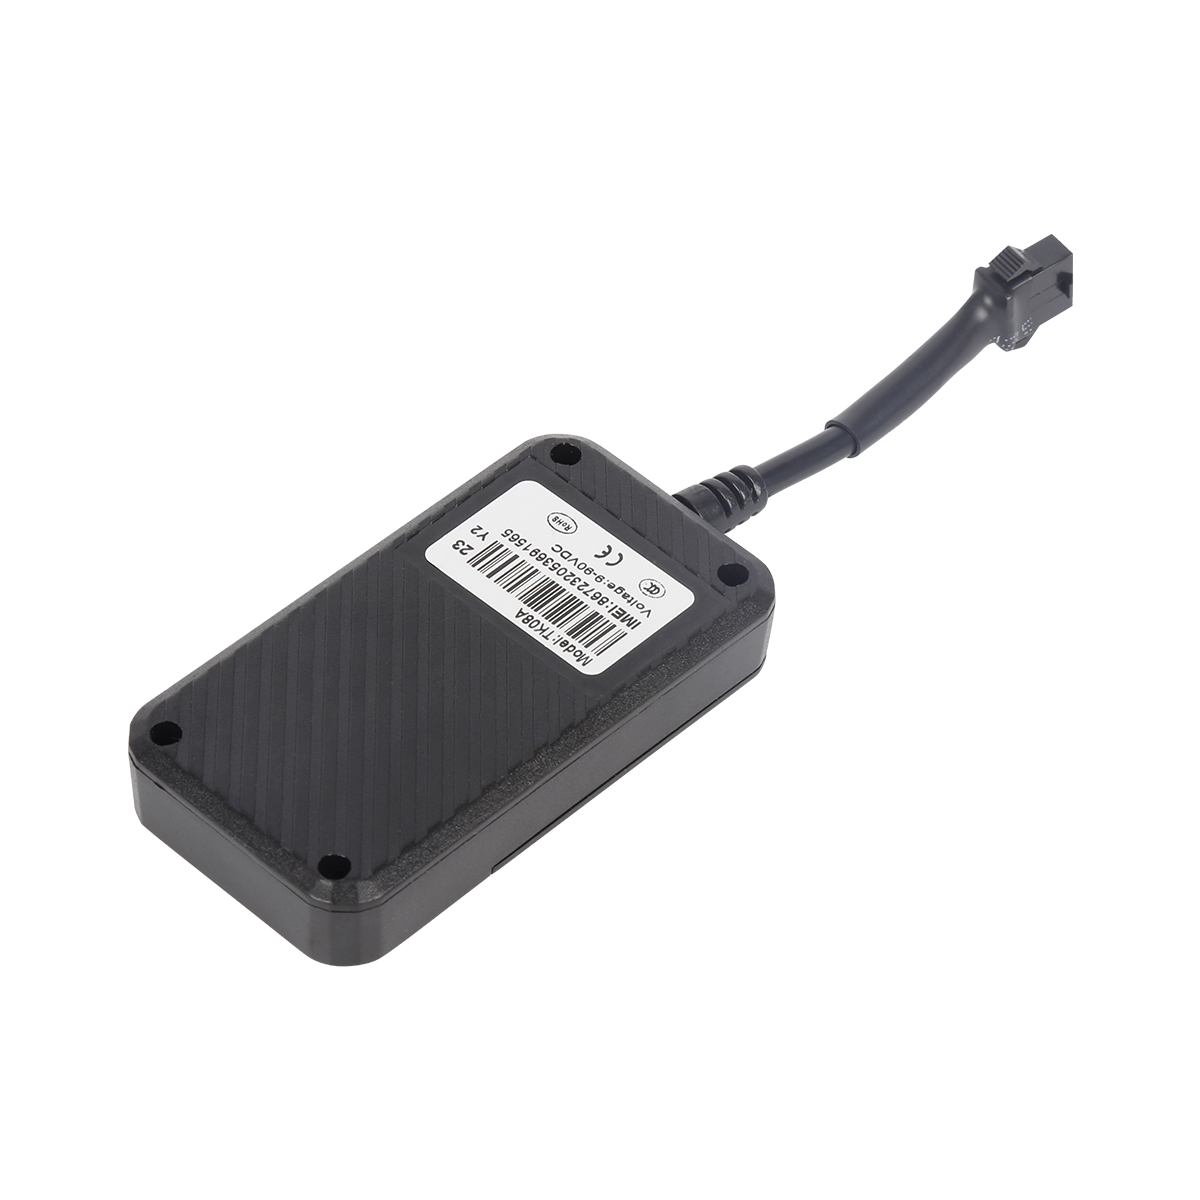 4G GPS Tracker for vehicles